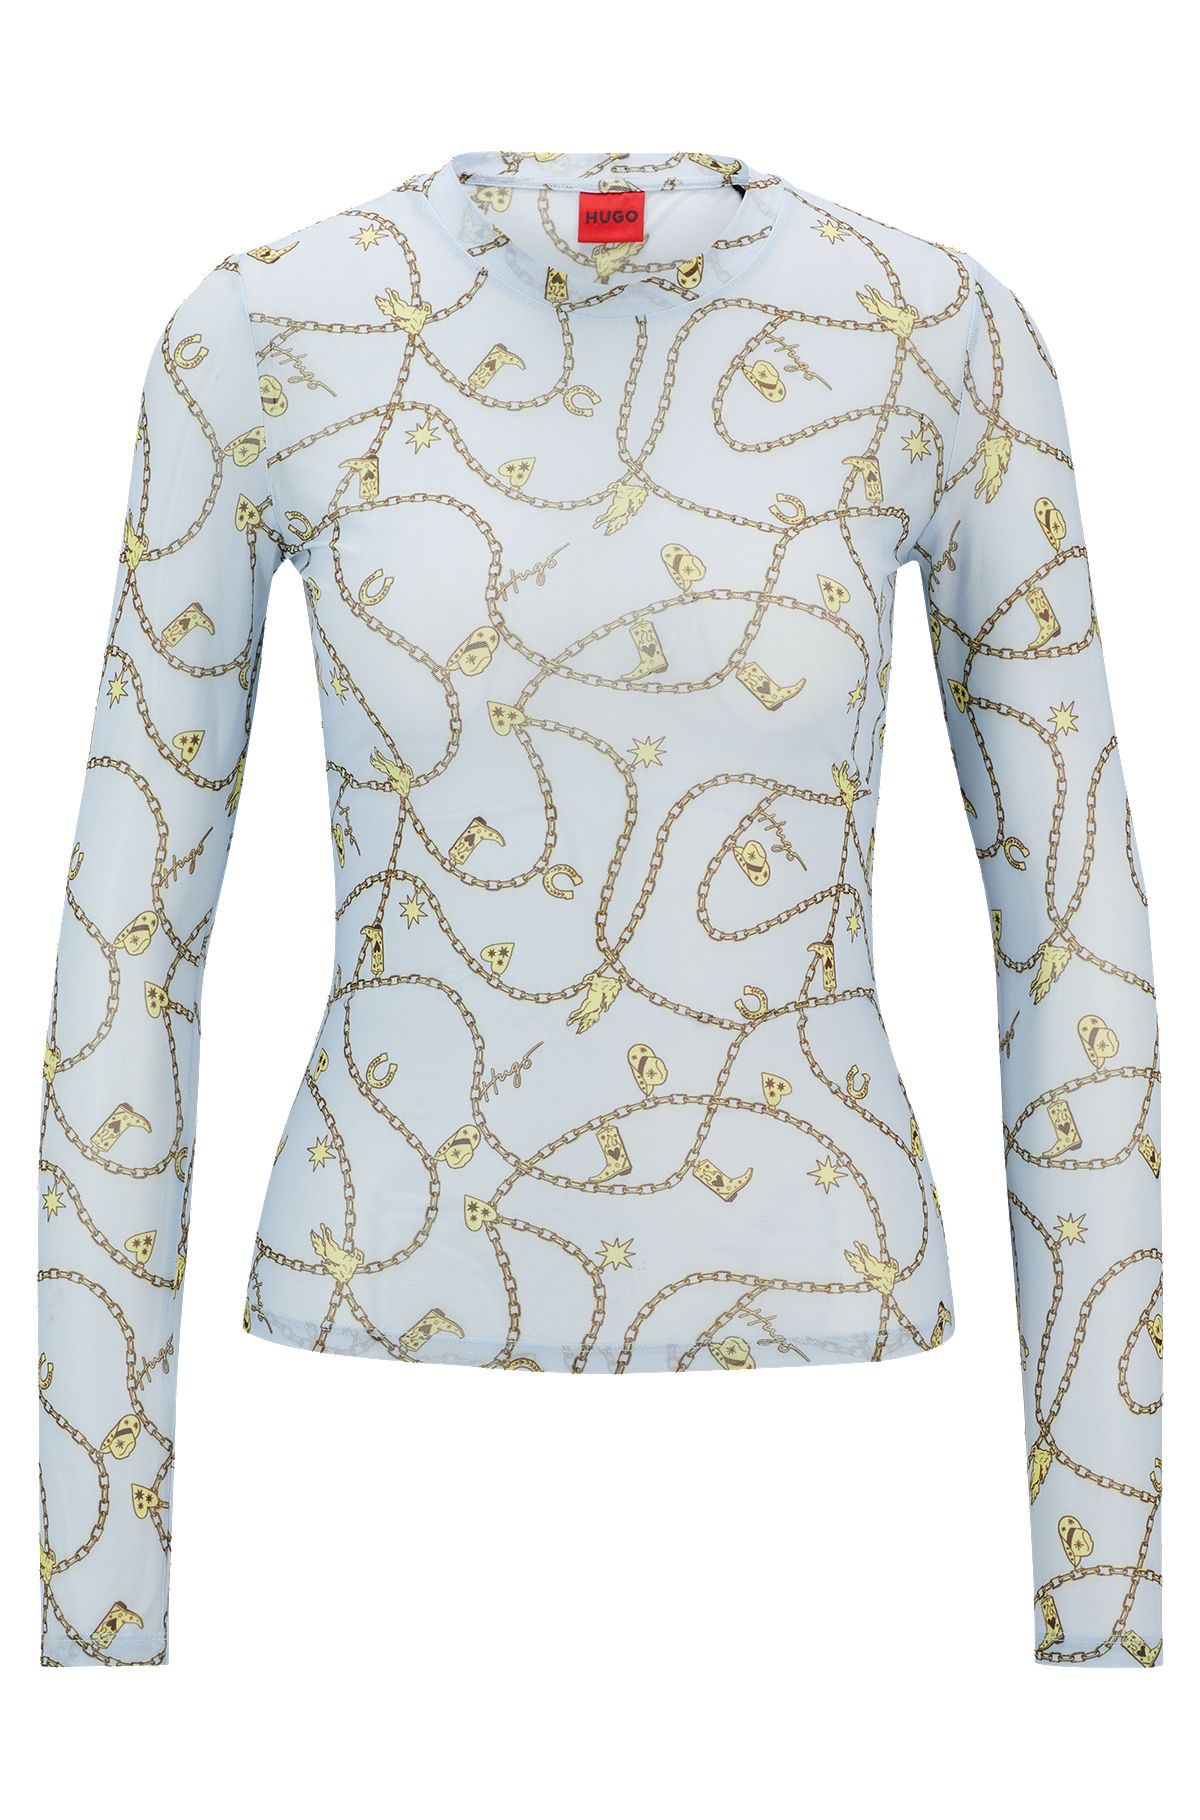 Long-sleeved top in stretch mesh with seasonal print, White Patterned